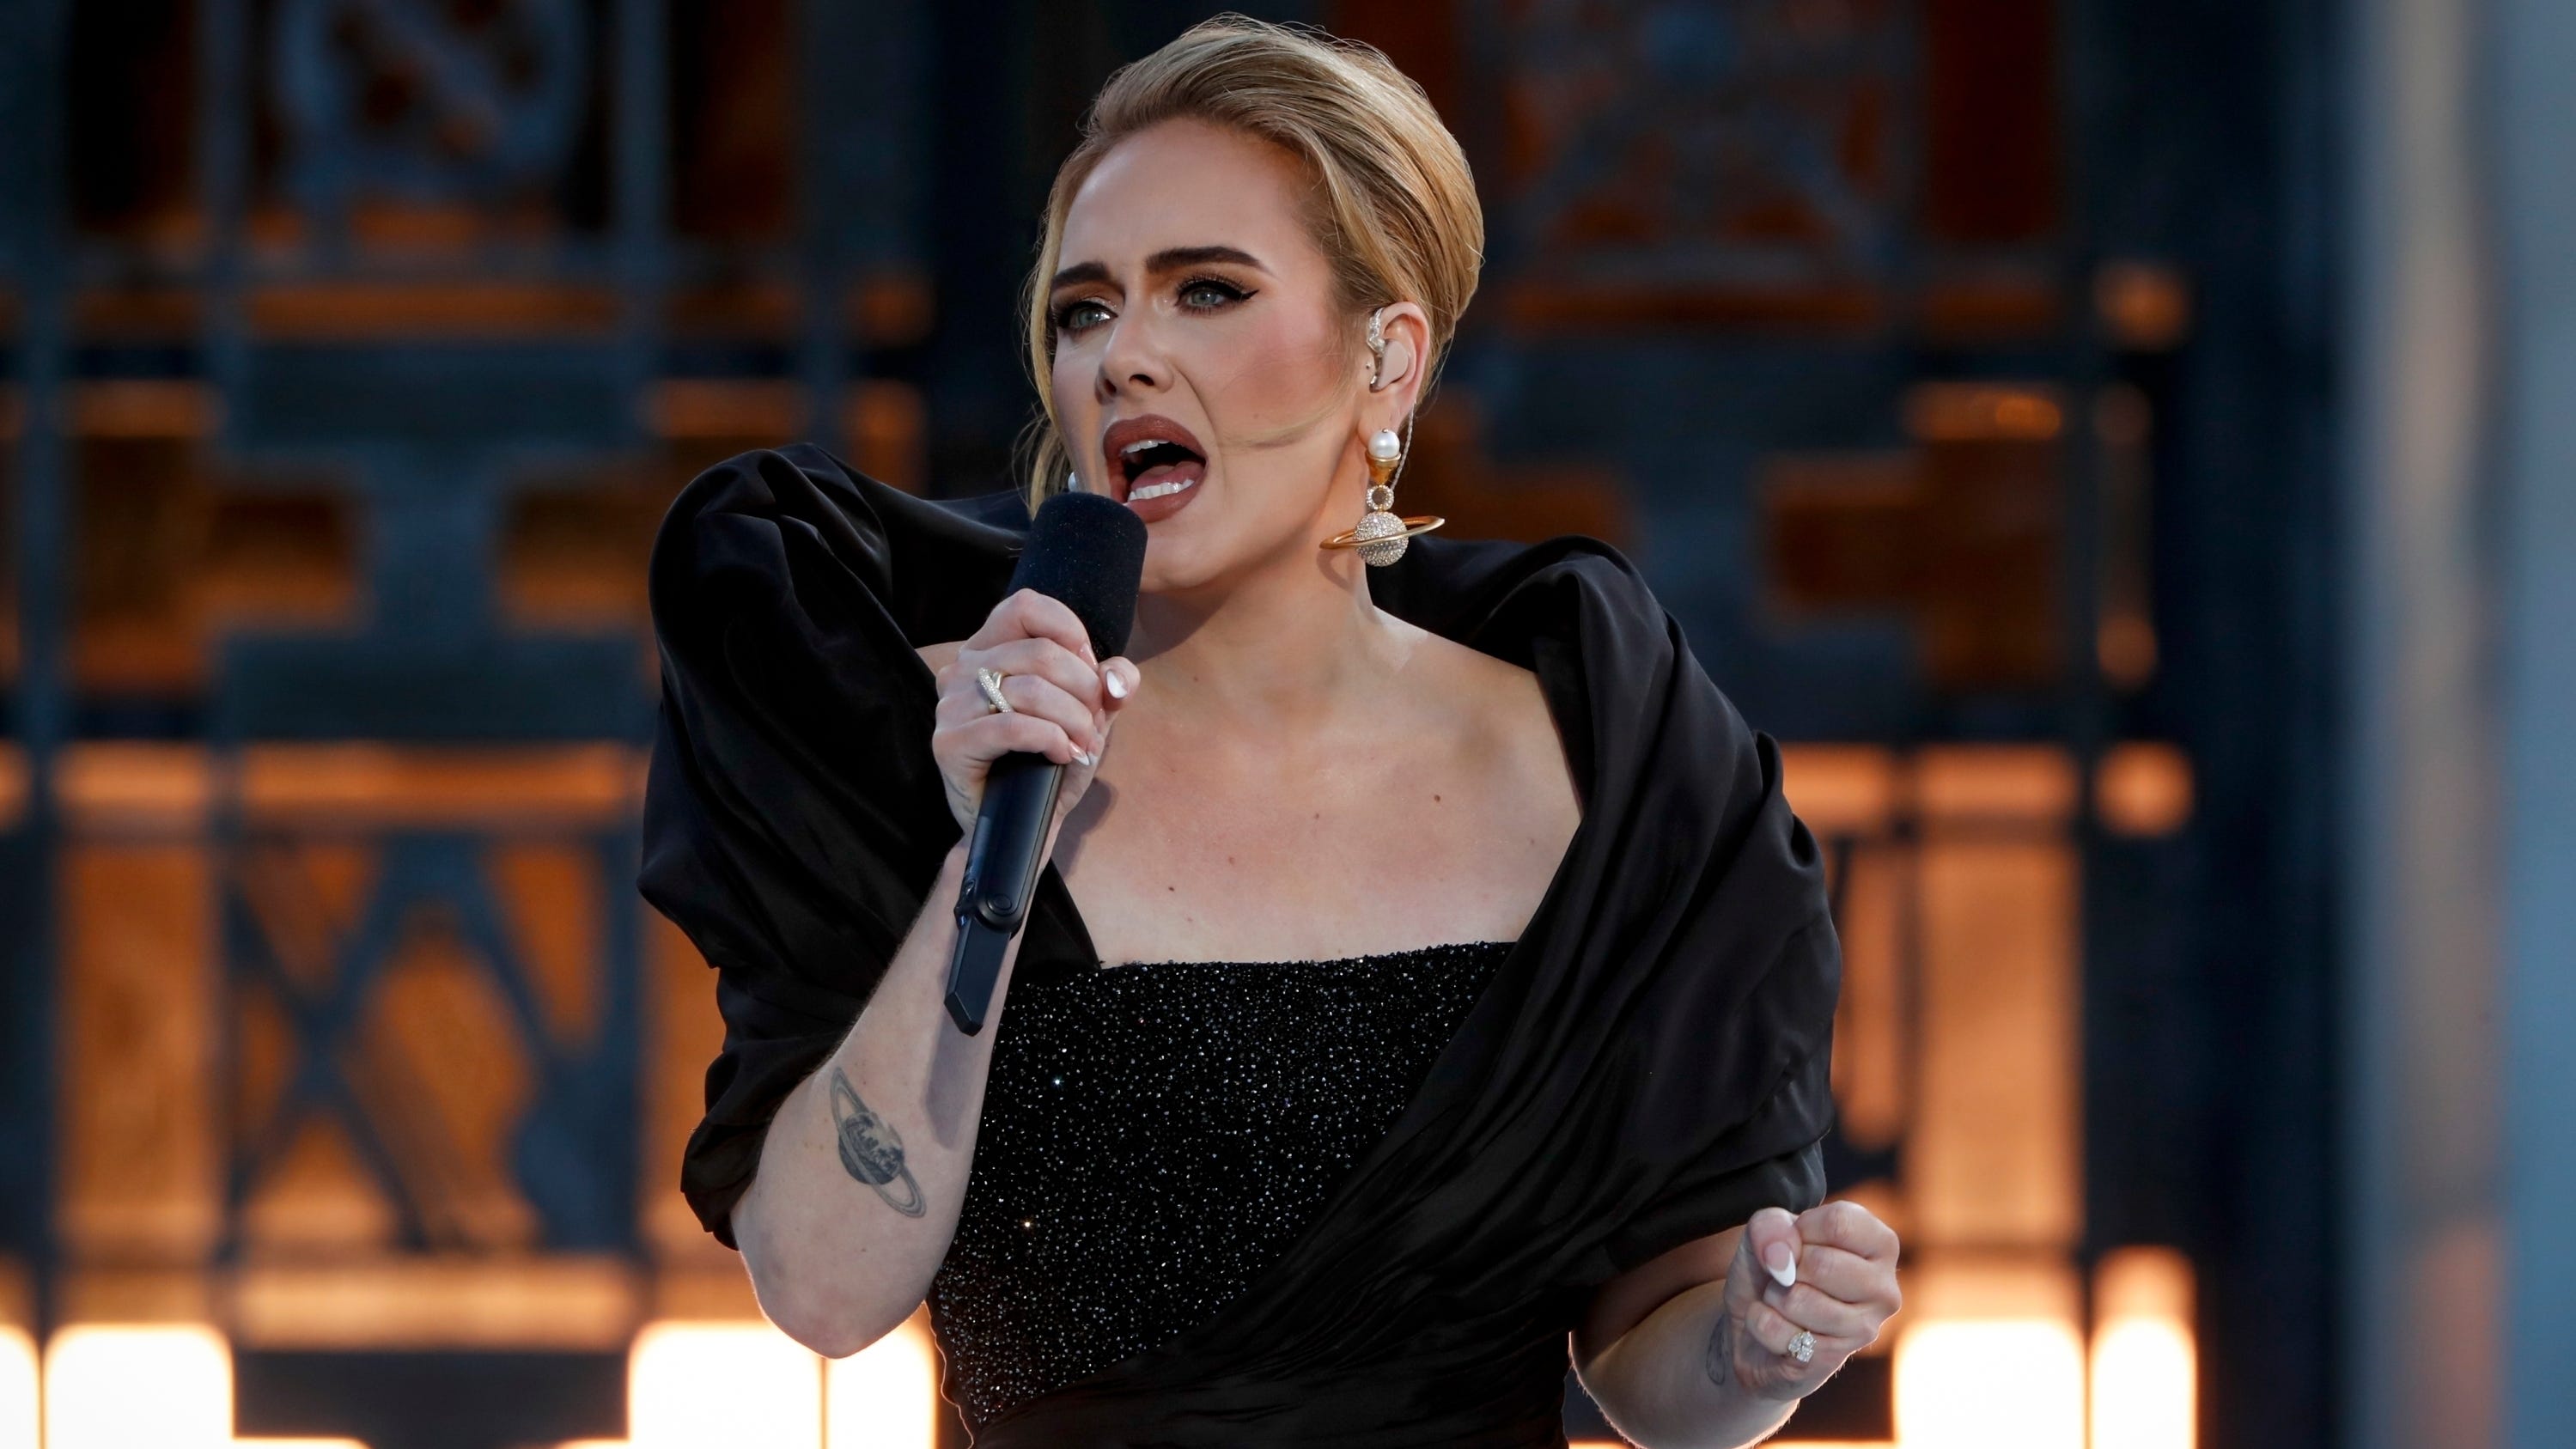 Adele's Las Vegas concerts How to see her 202223 shows